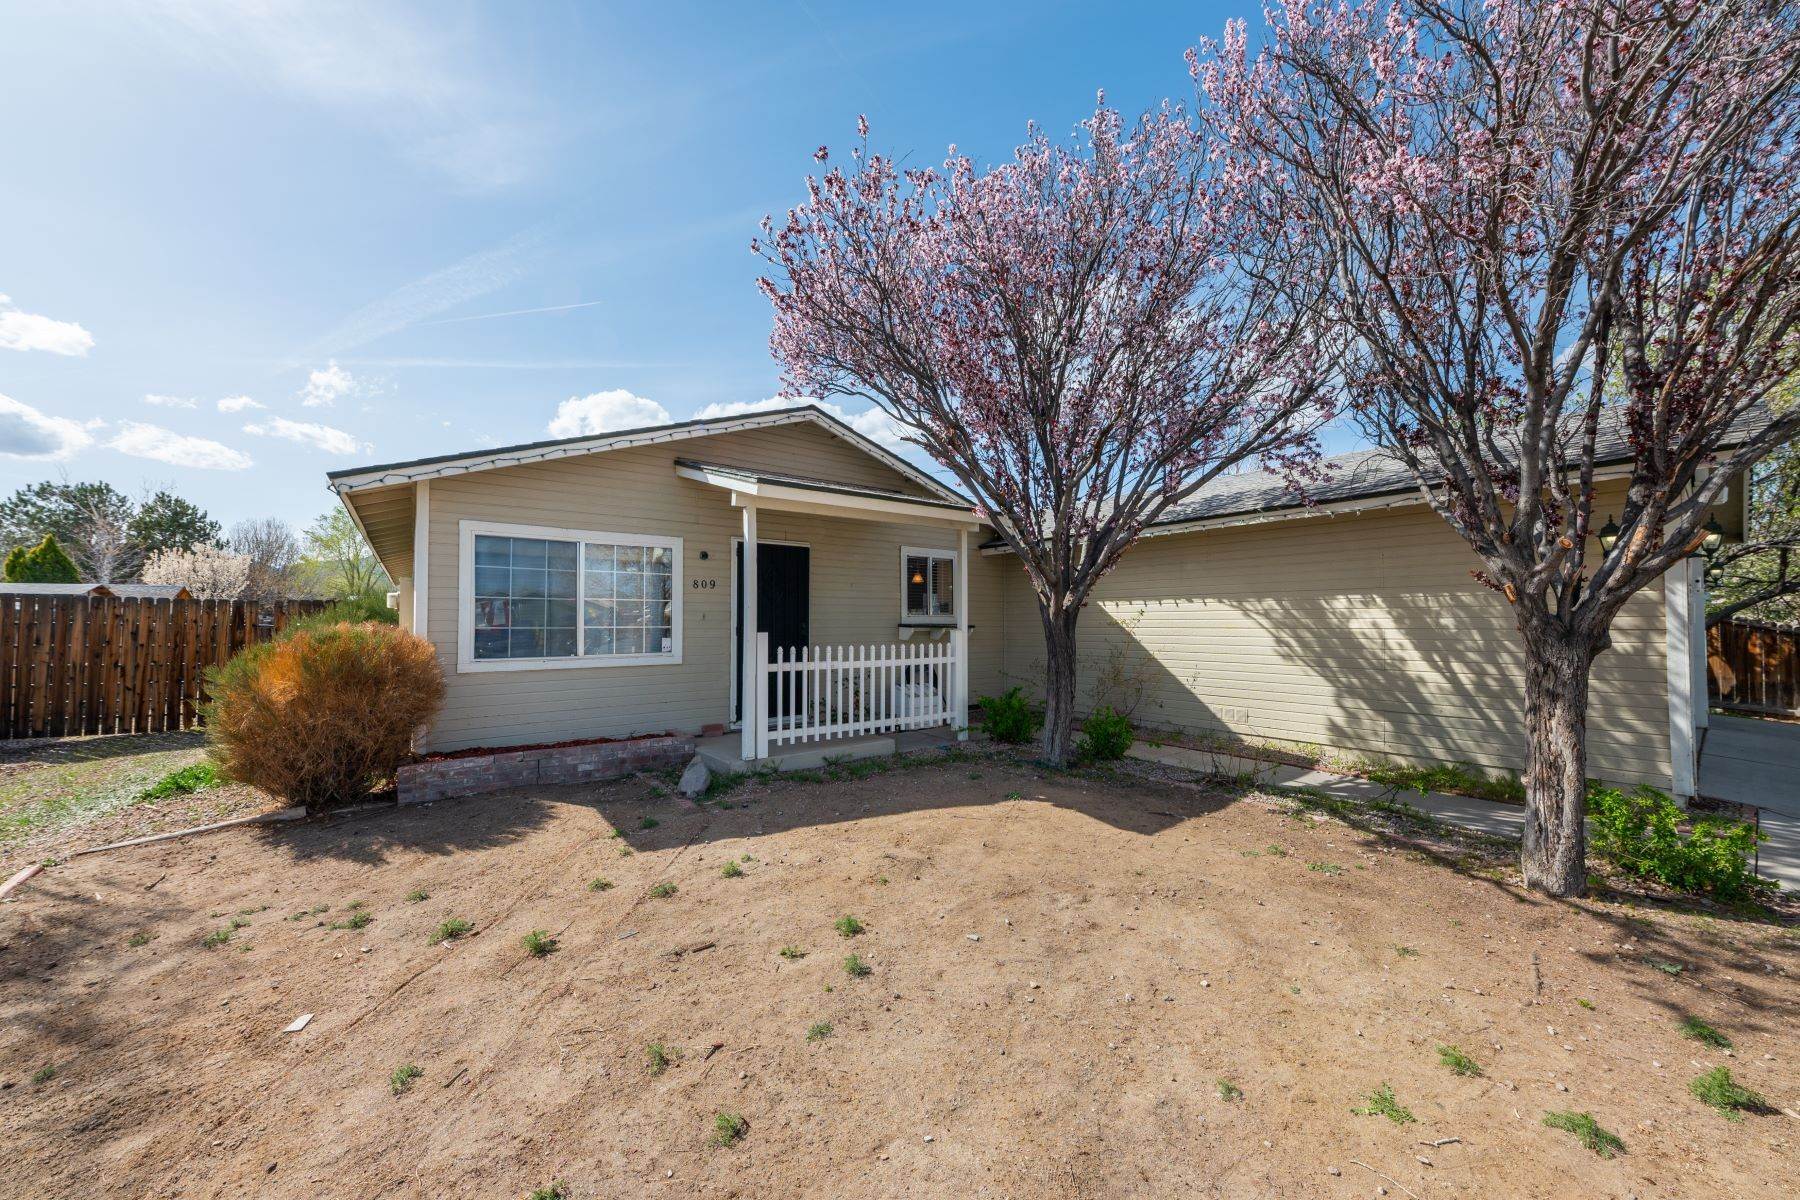 4. Single Family Homes for Active at 809 Overland Loop, Dayton, NV 89403 809 Overland Loop Dayton, Nevada 89403 United States